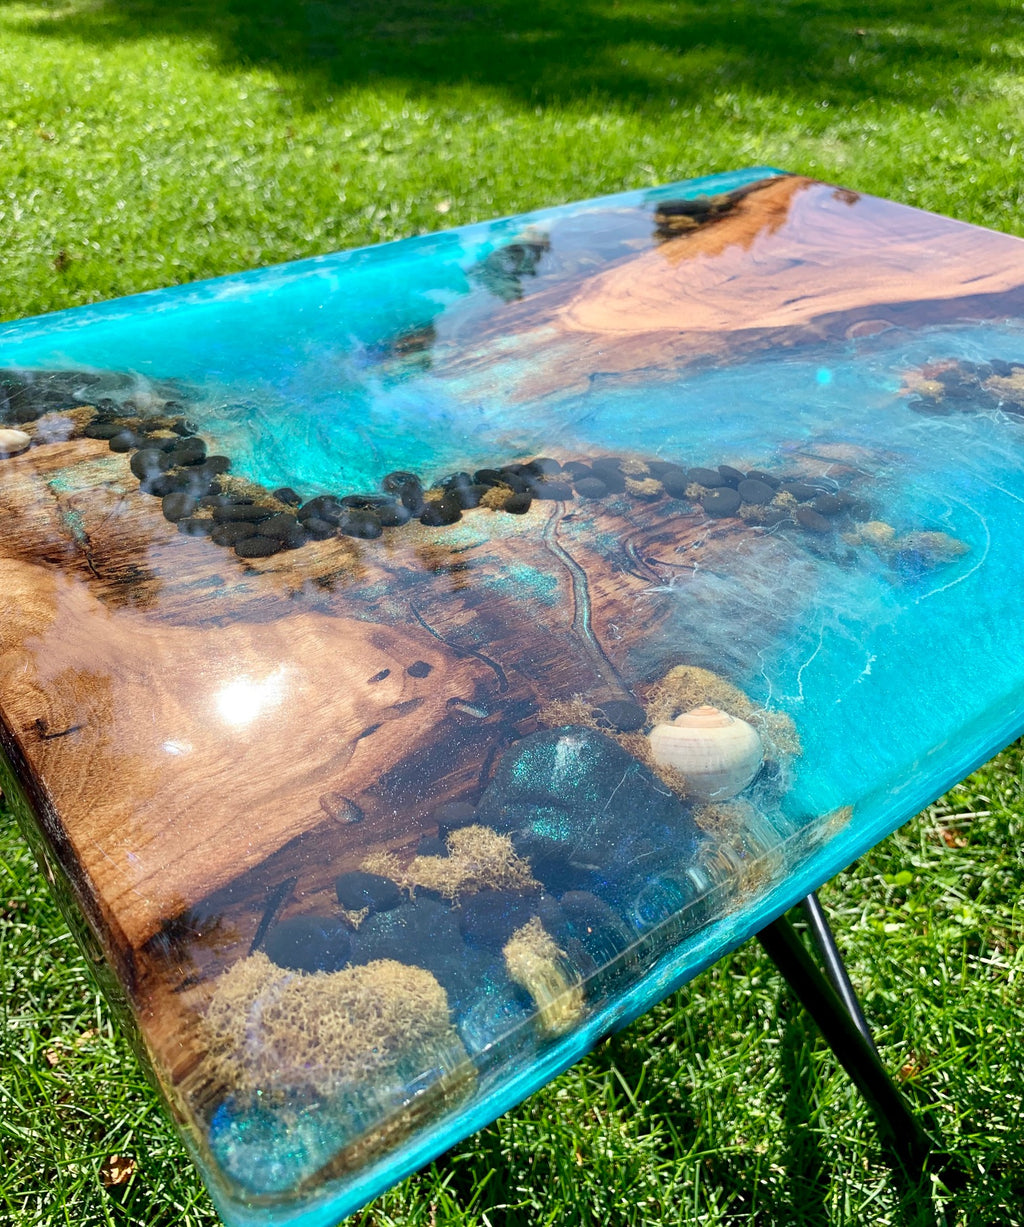 Our guide to embedding objects in epoxy resin